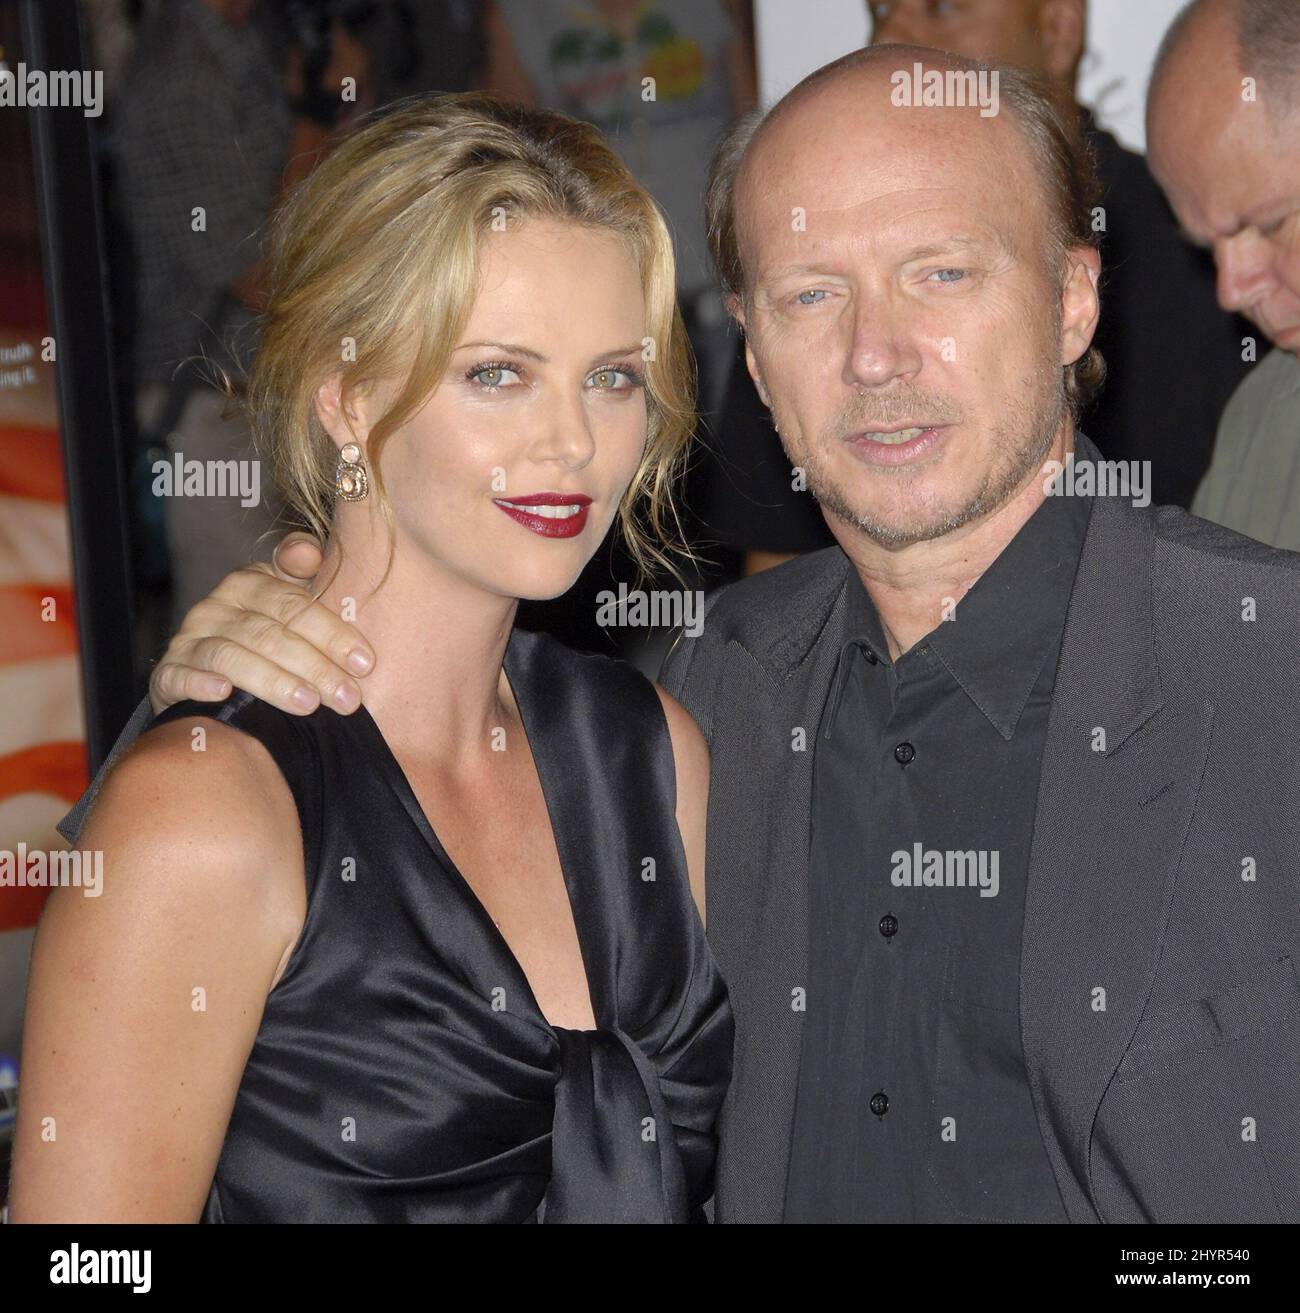 Charlize Theron and Paul Haggis at the Los Angeles premiere of movie 'In the Valley of Elah' in Los Angeles, CA. Stock Photo